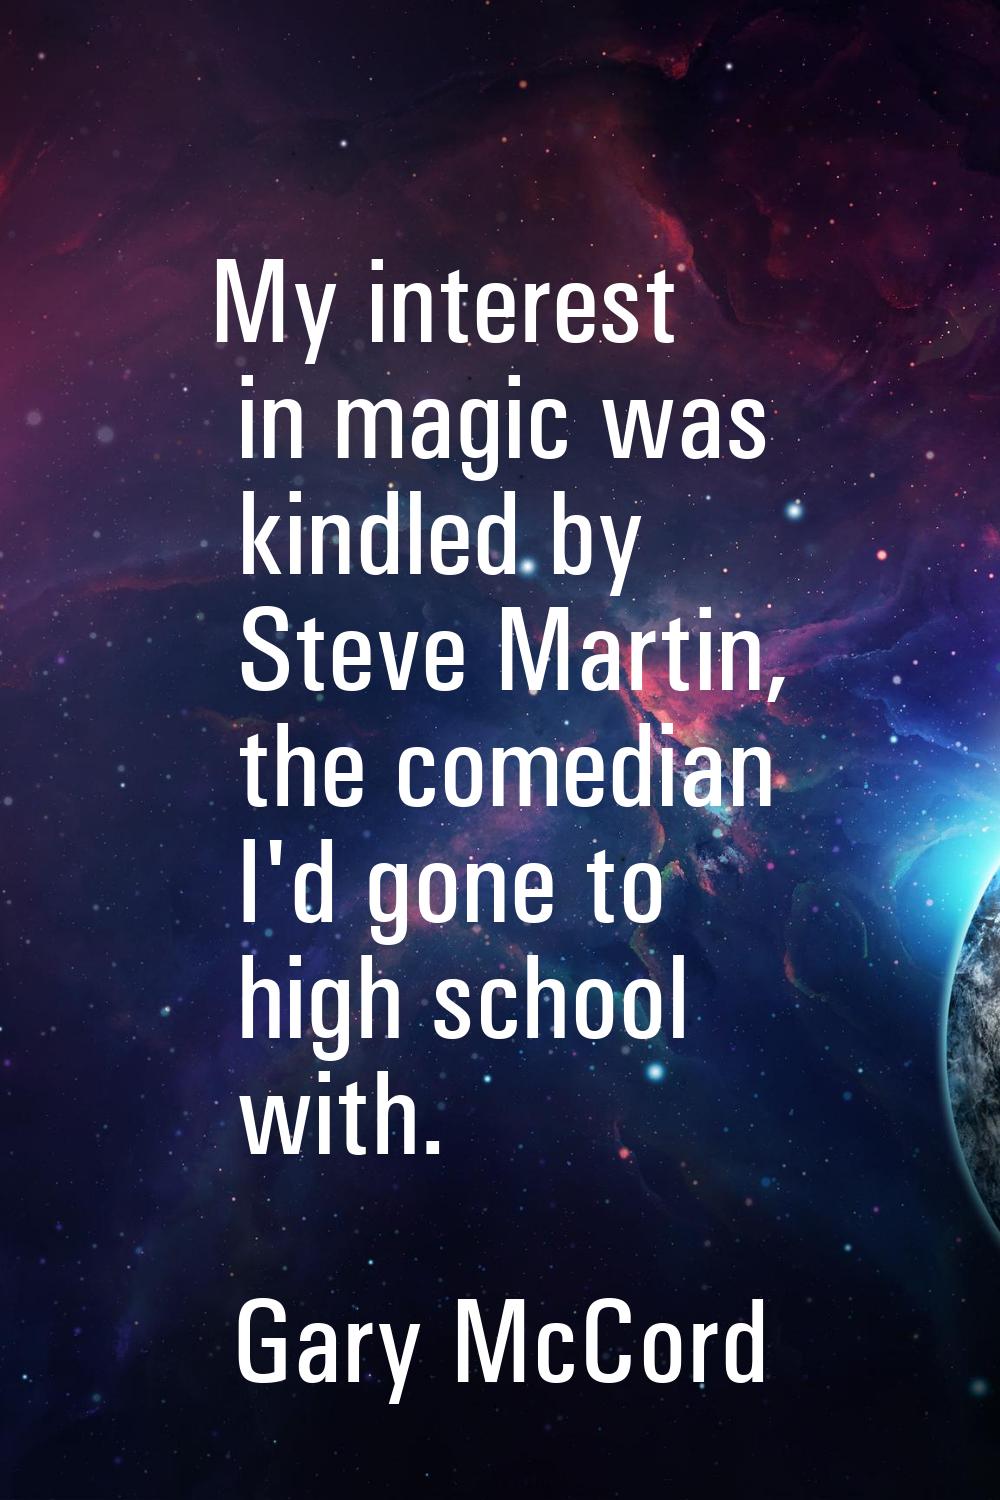 My interest in magic was kindled by Steve Martin, the comedian I'd gone to high school with.